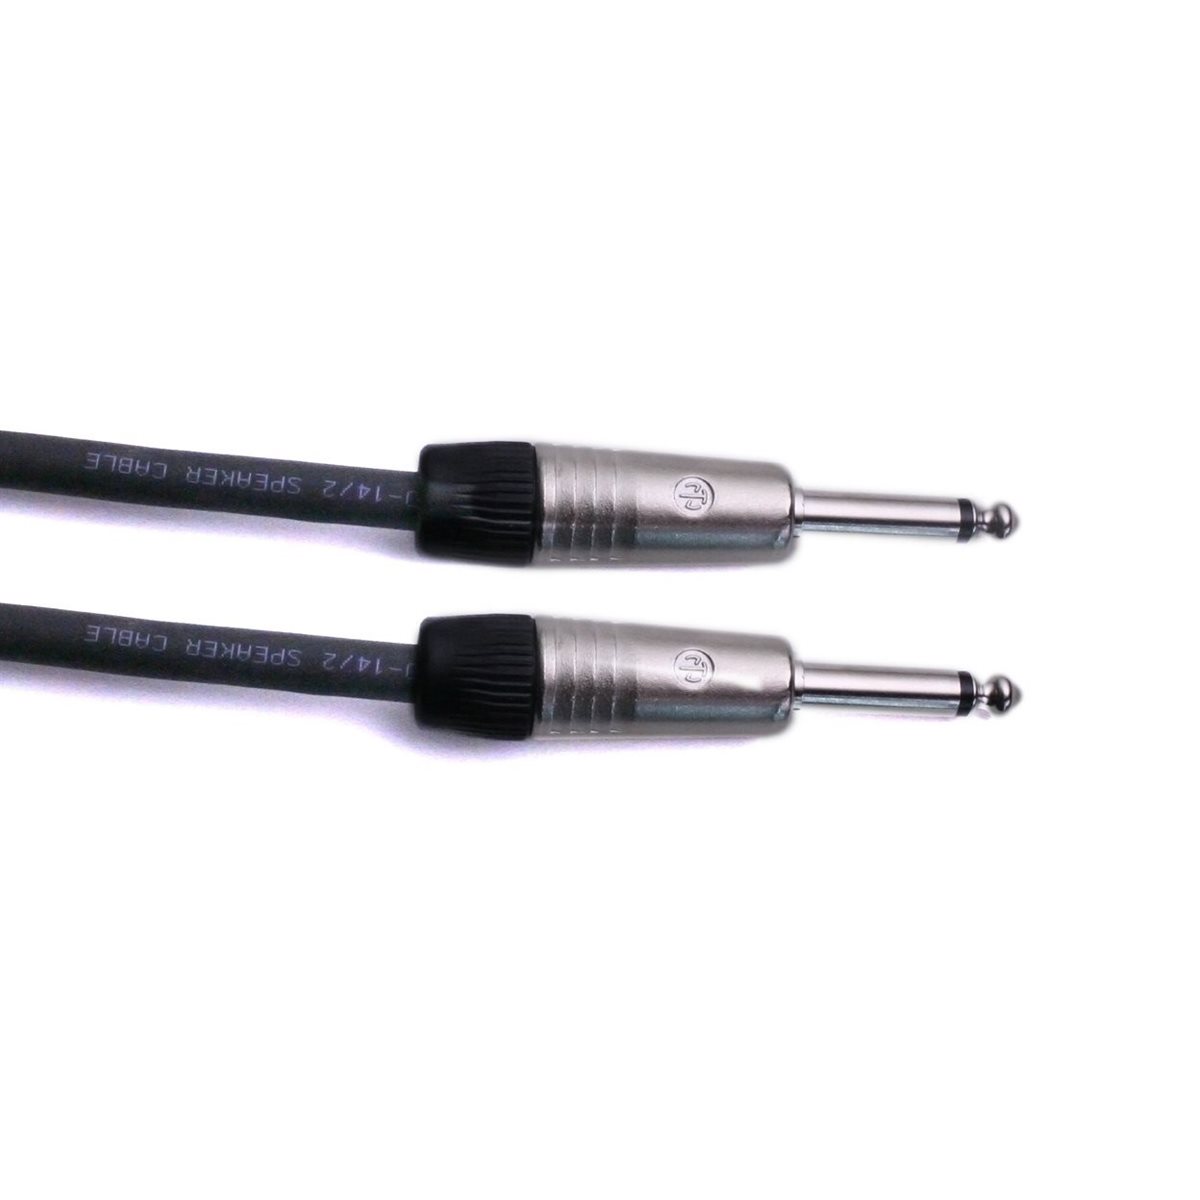 DIGIFLEX - NLSP Series 14 AWG Speaker Cables - 5''